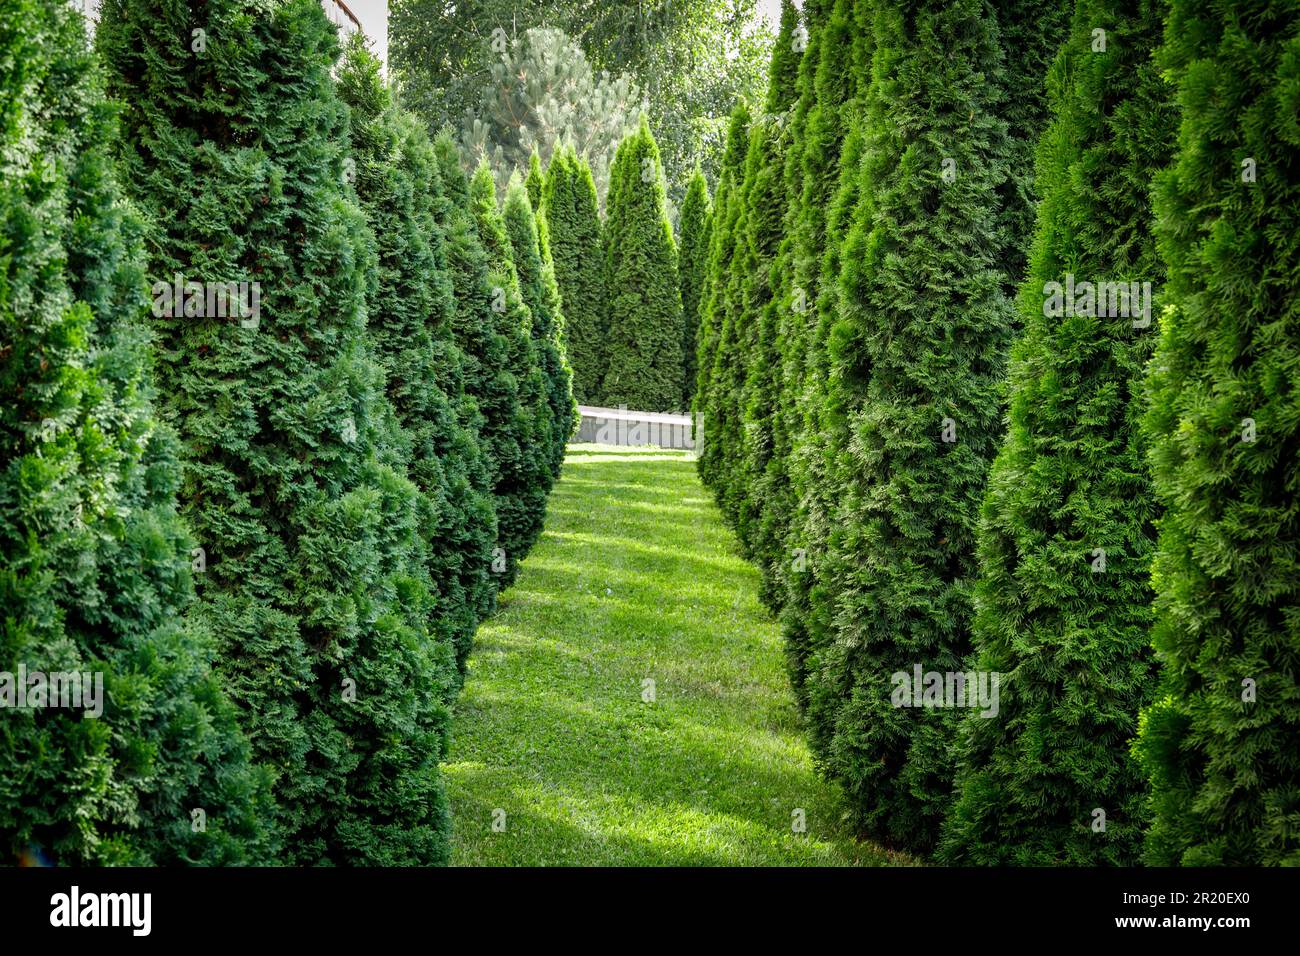 Green path of trees in a park full of thujas Stock Photo